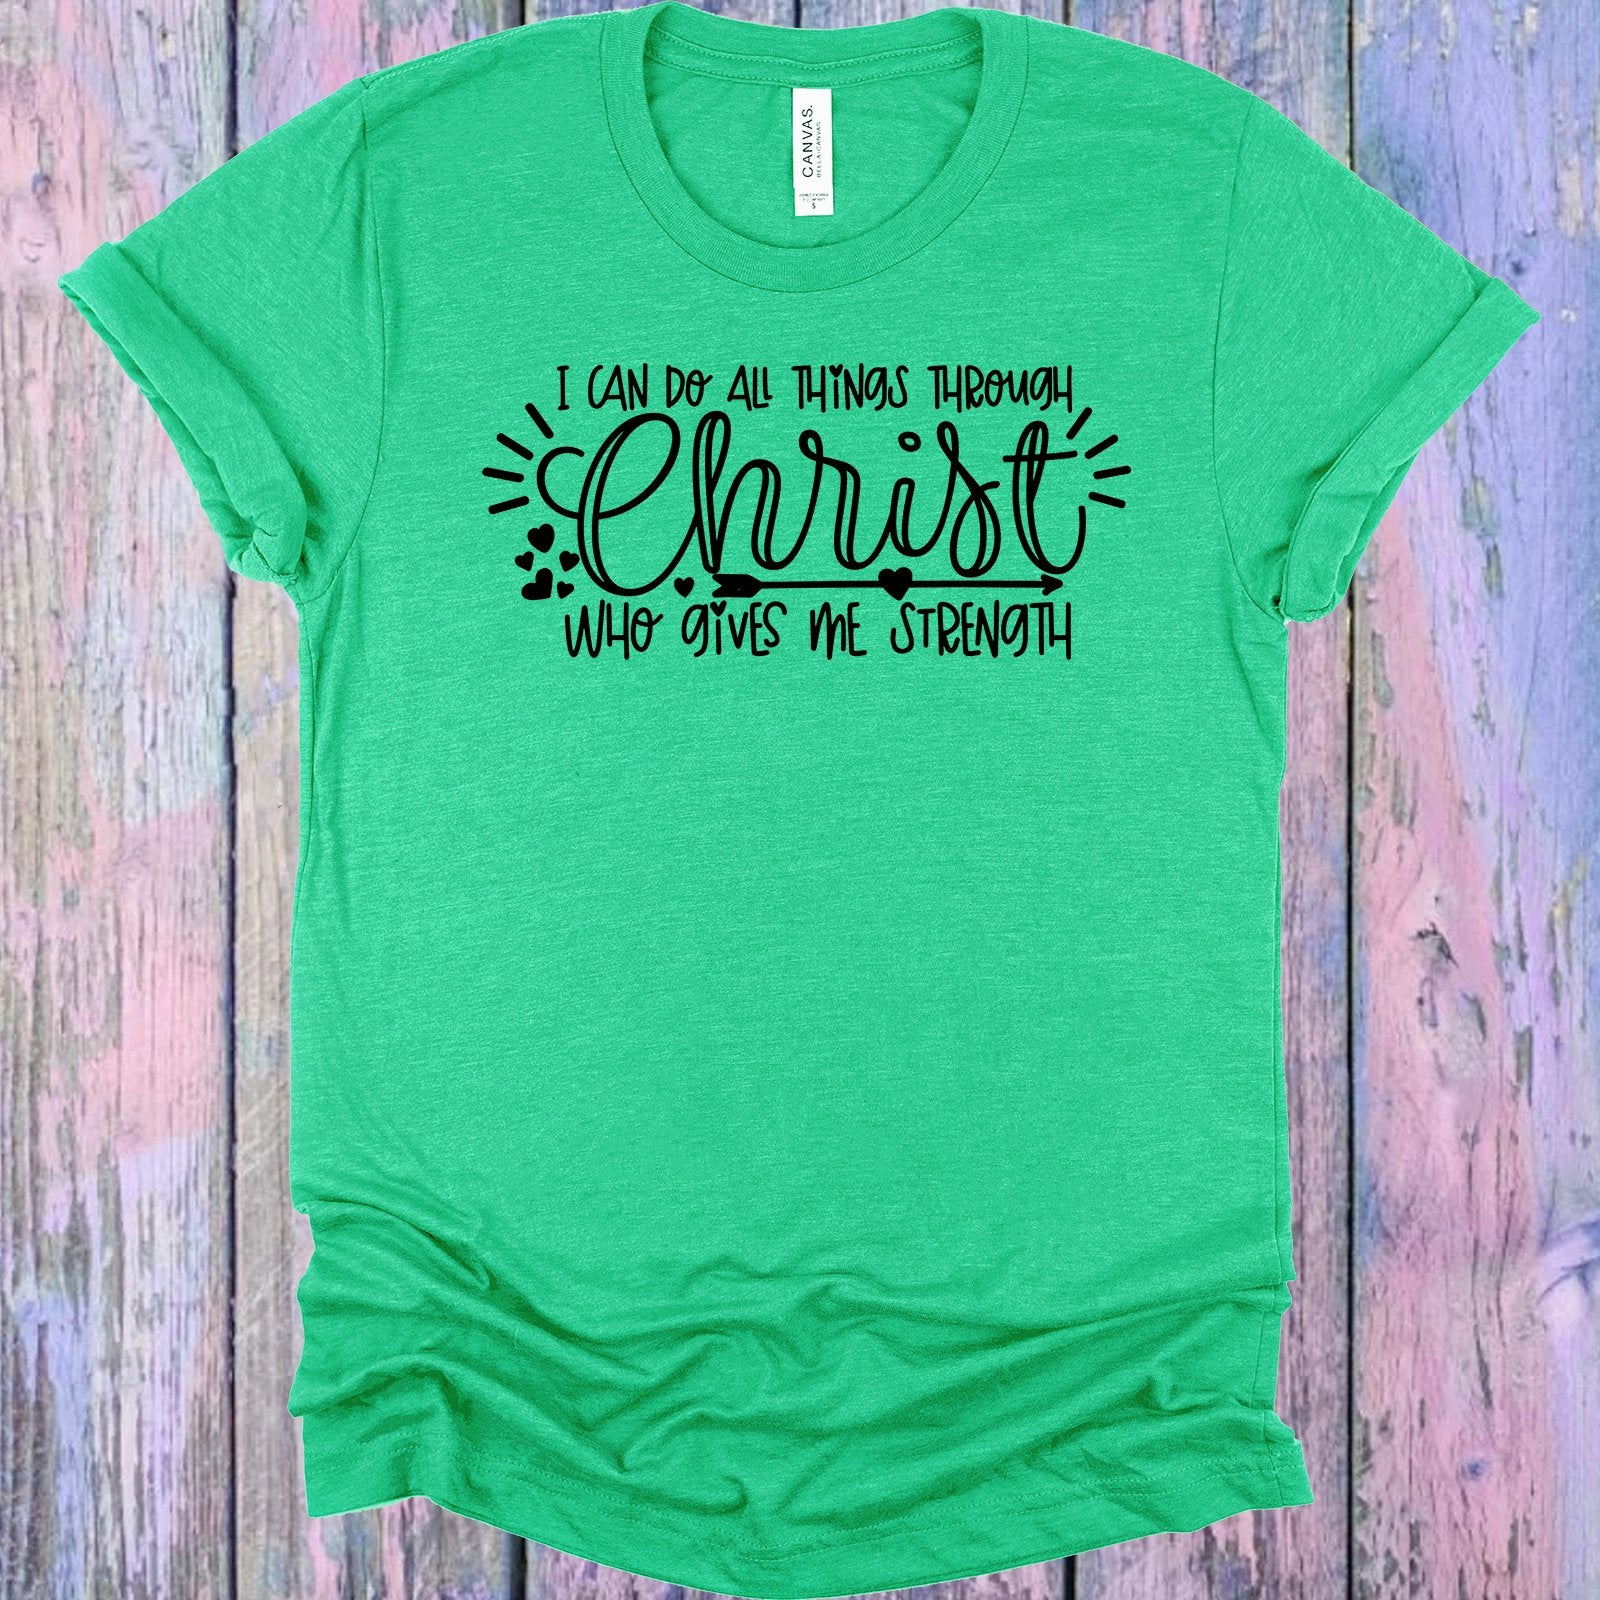 I Can Do All Things Through Christ Who Gives Me Strength Graphic Tee Graphic Tee